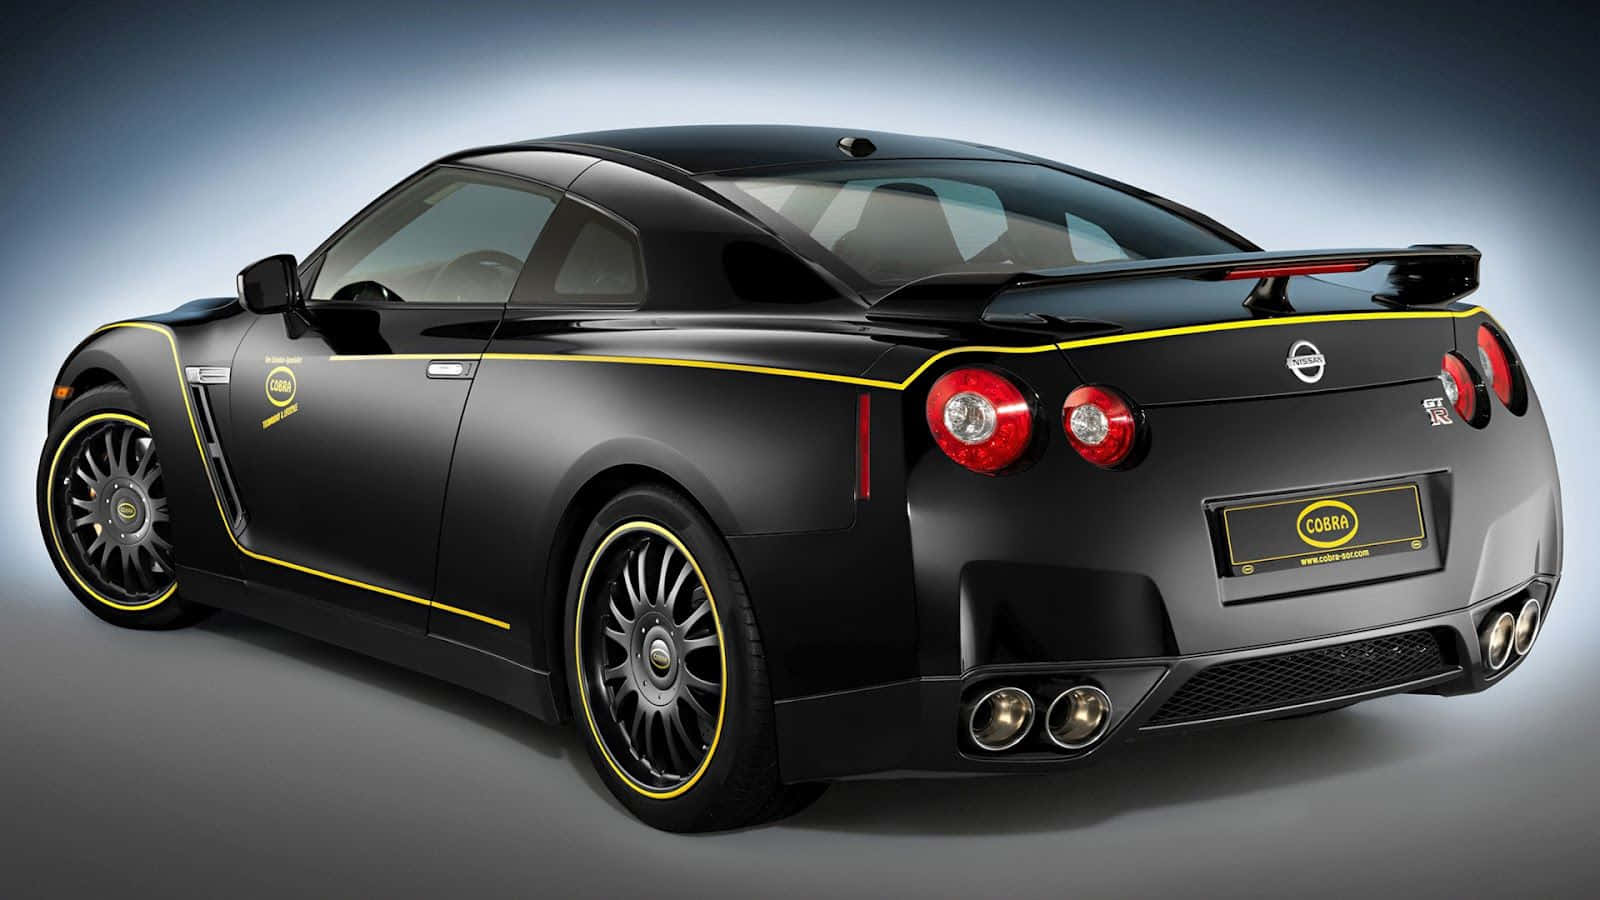 Put The Pedal To The Metal In The Stunning Cool Gtr